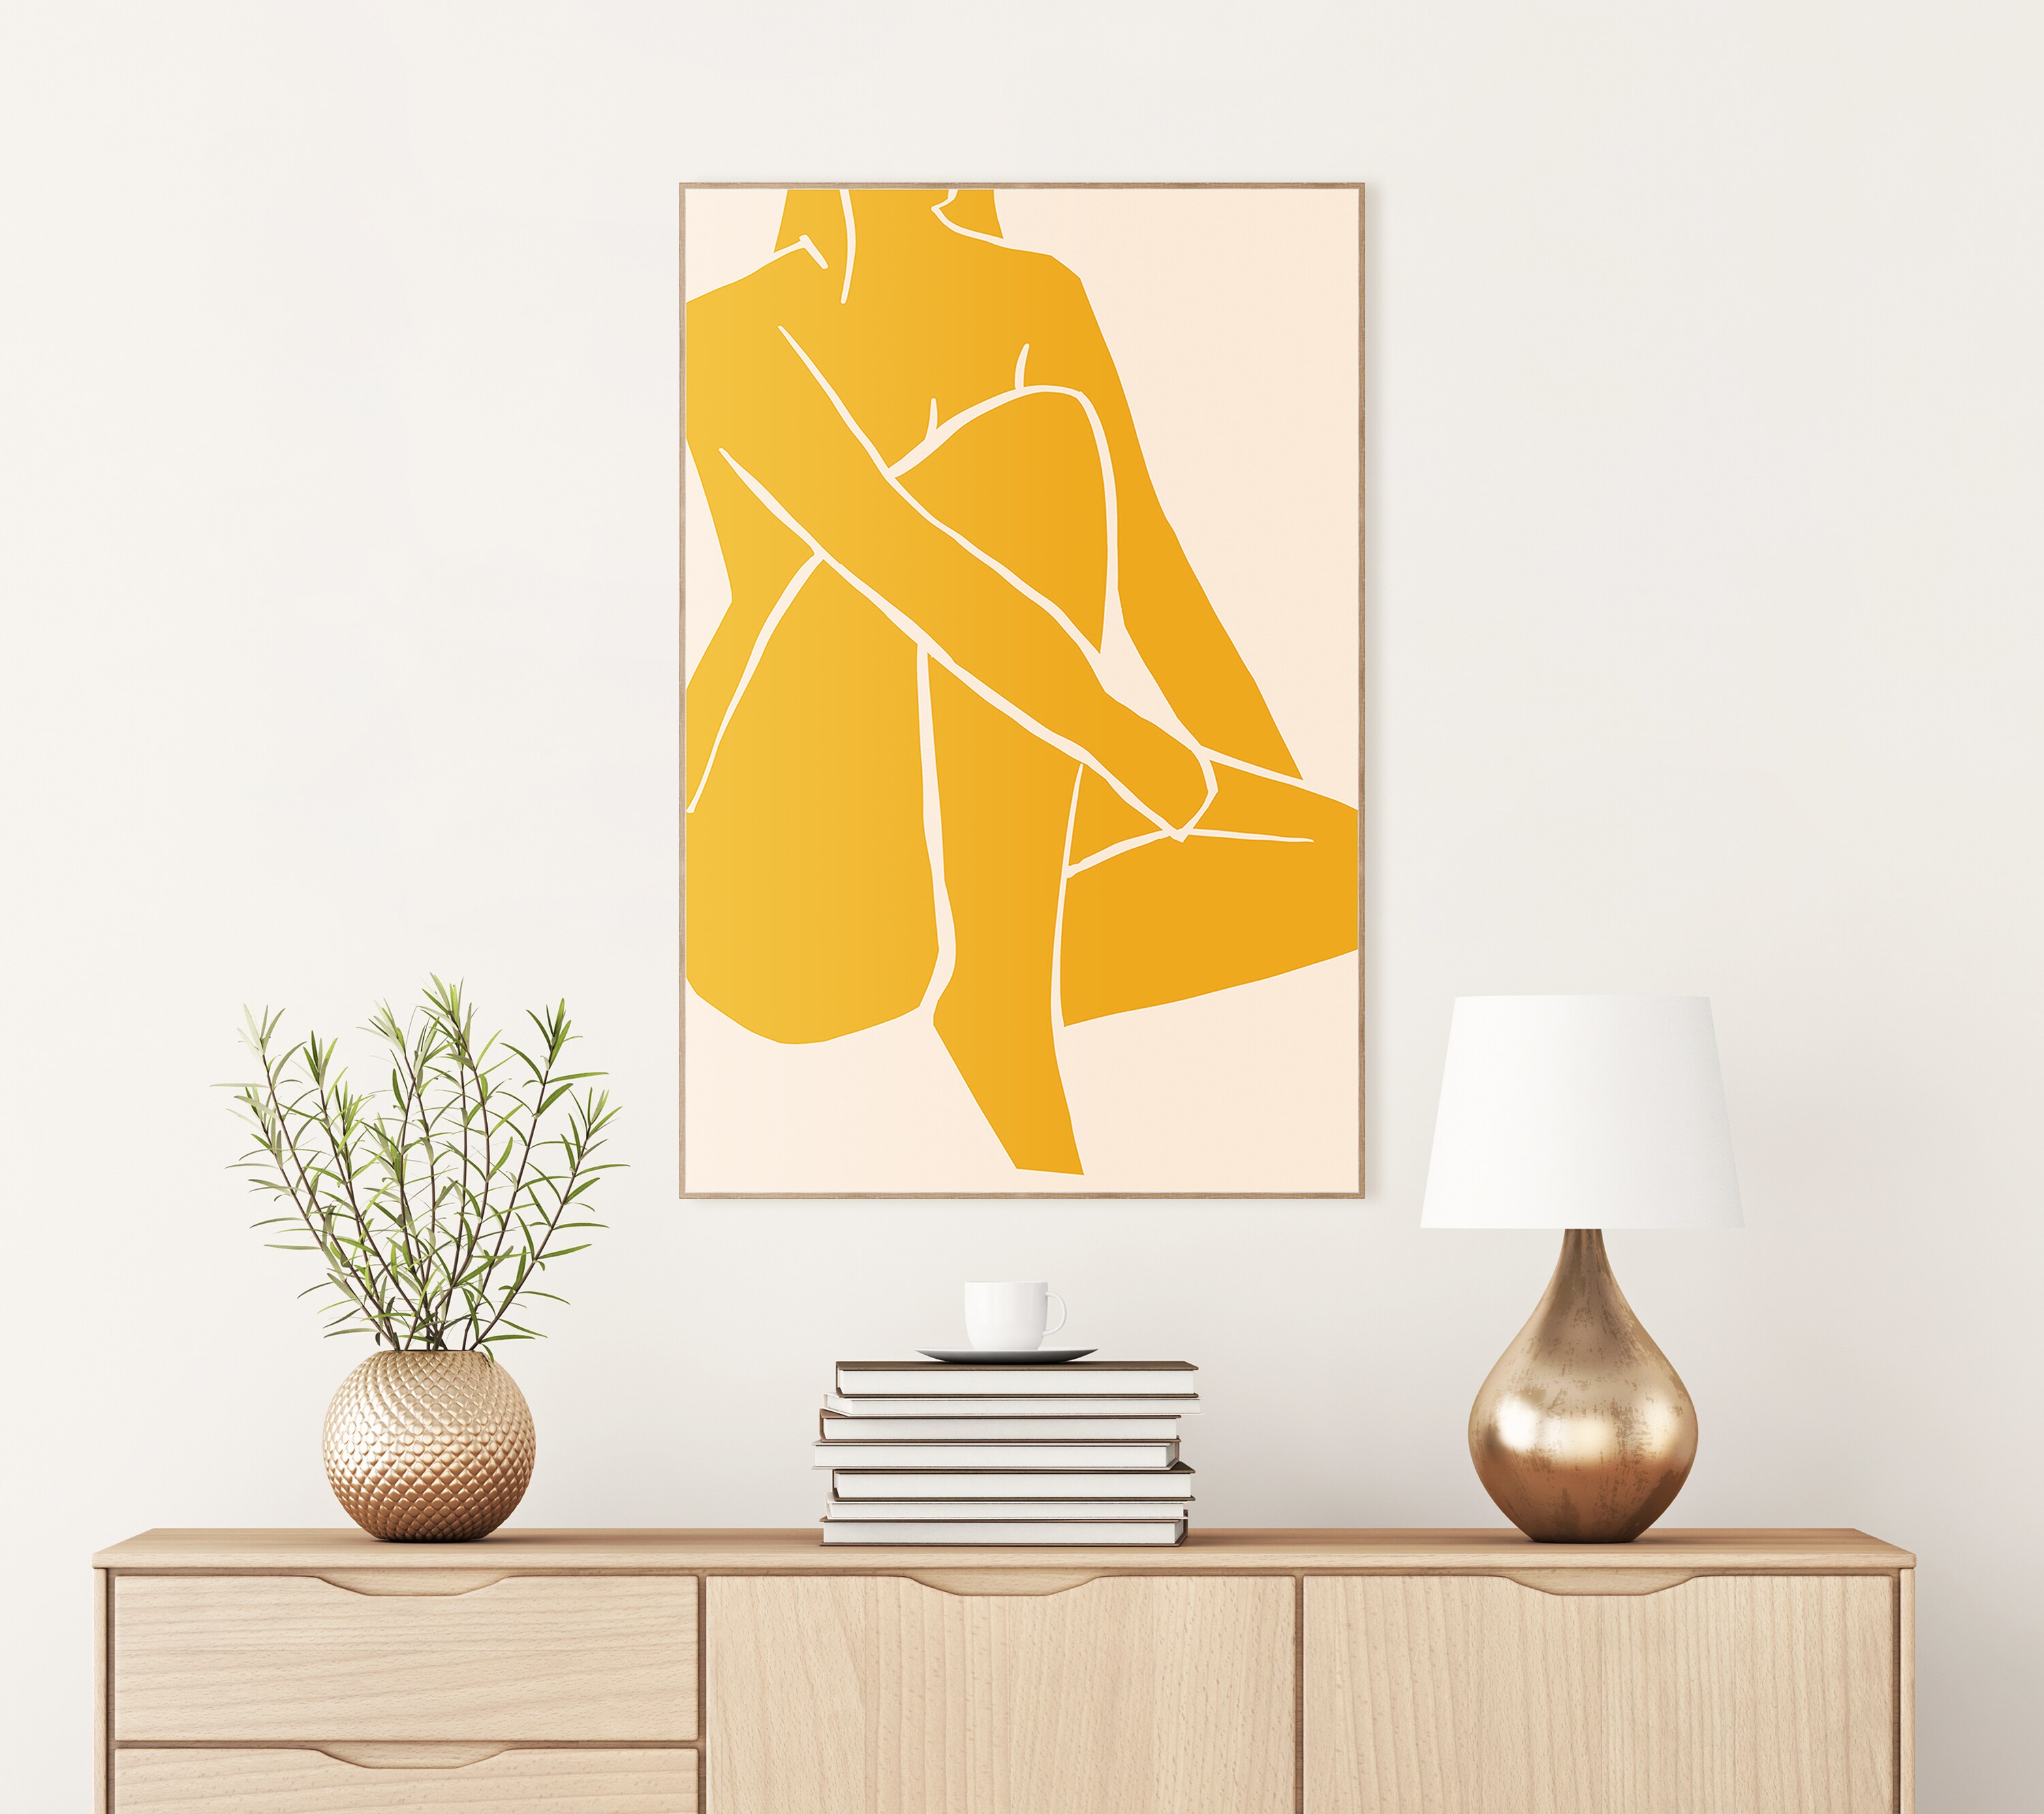 Fashion Essentials with Iconic Glam Brands Canvas Wall Art by Amanda Greenwood Stupell Industries Frame Color: Gold Framed, Size: 31 H x 25 W x 1.7